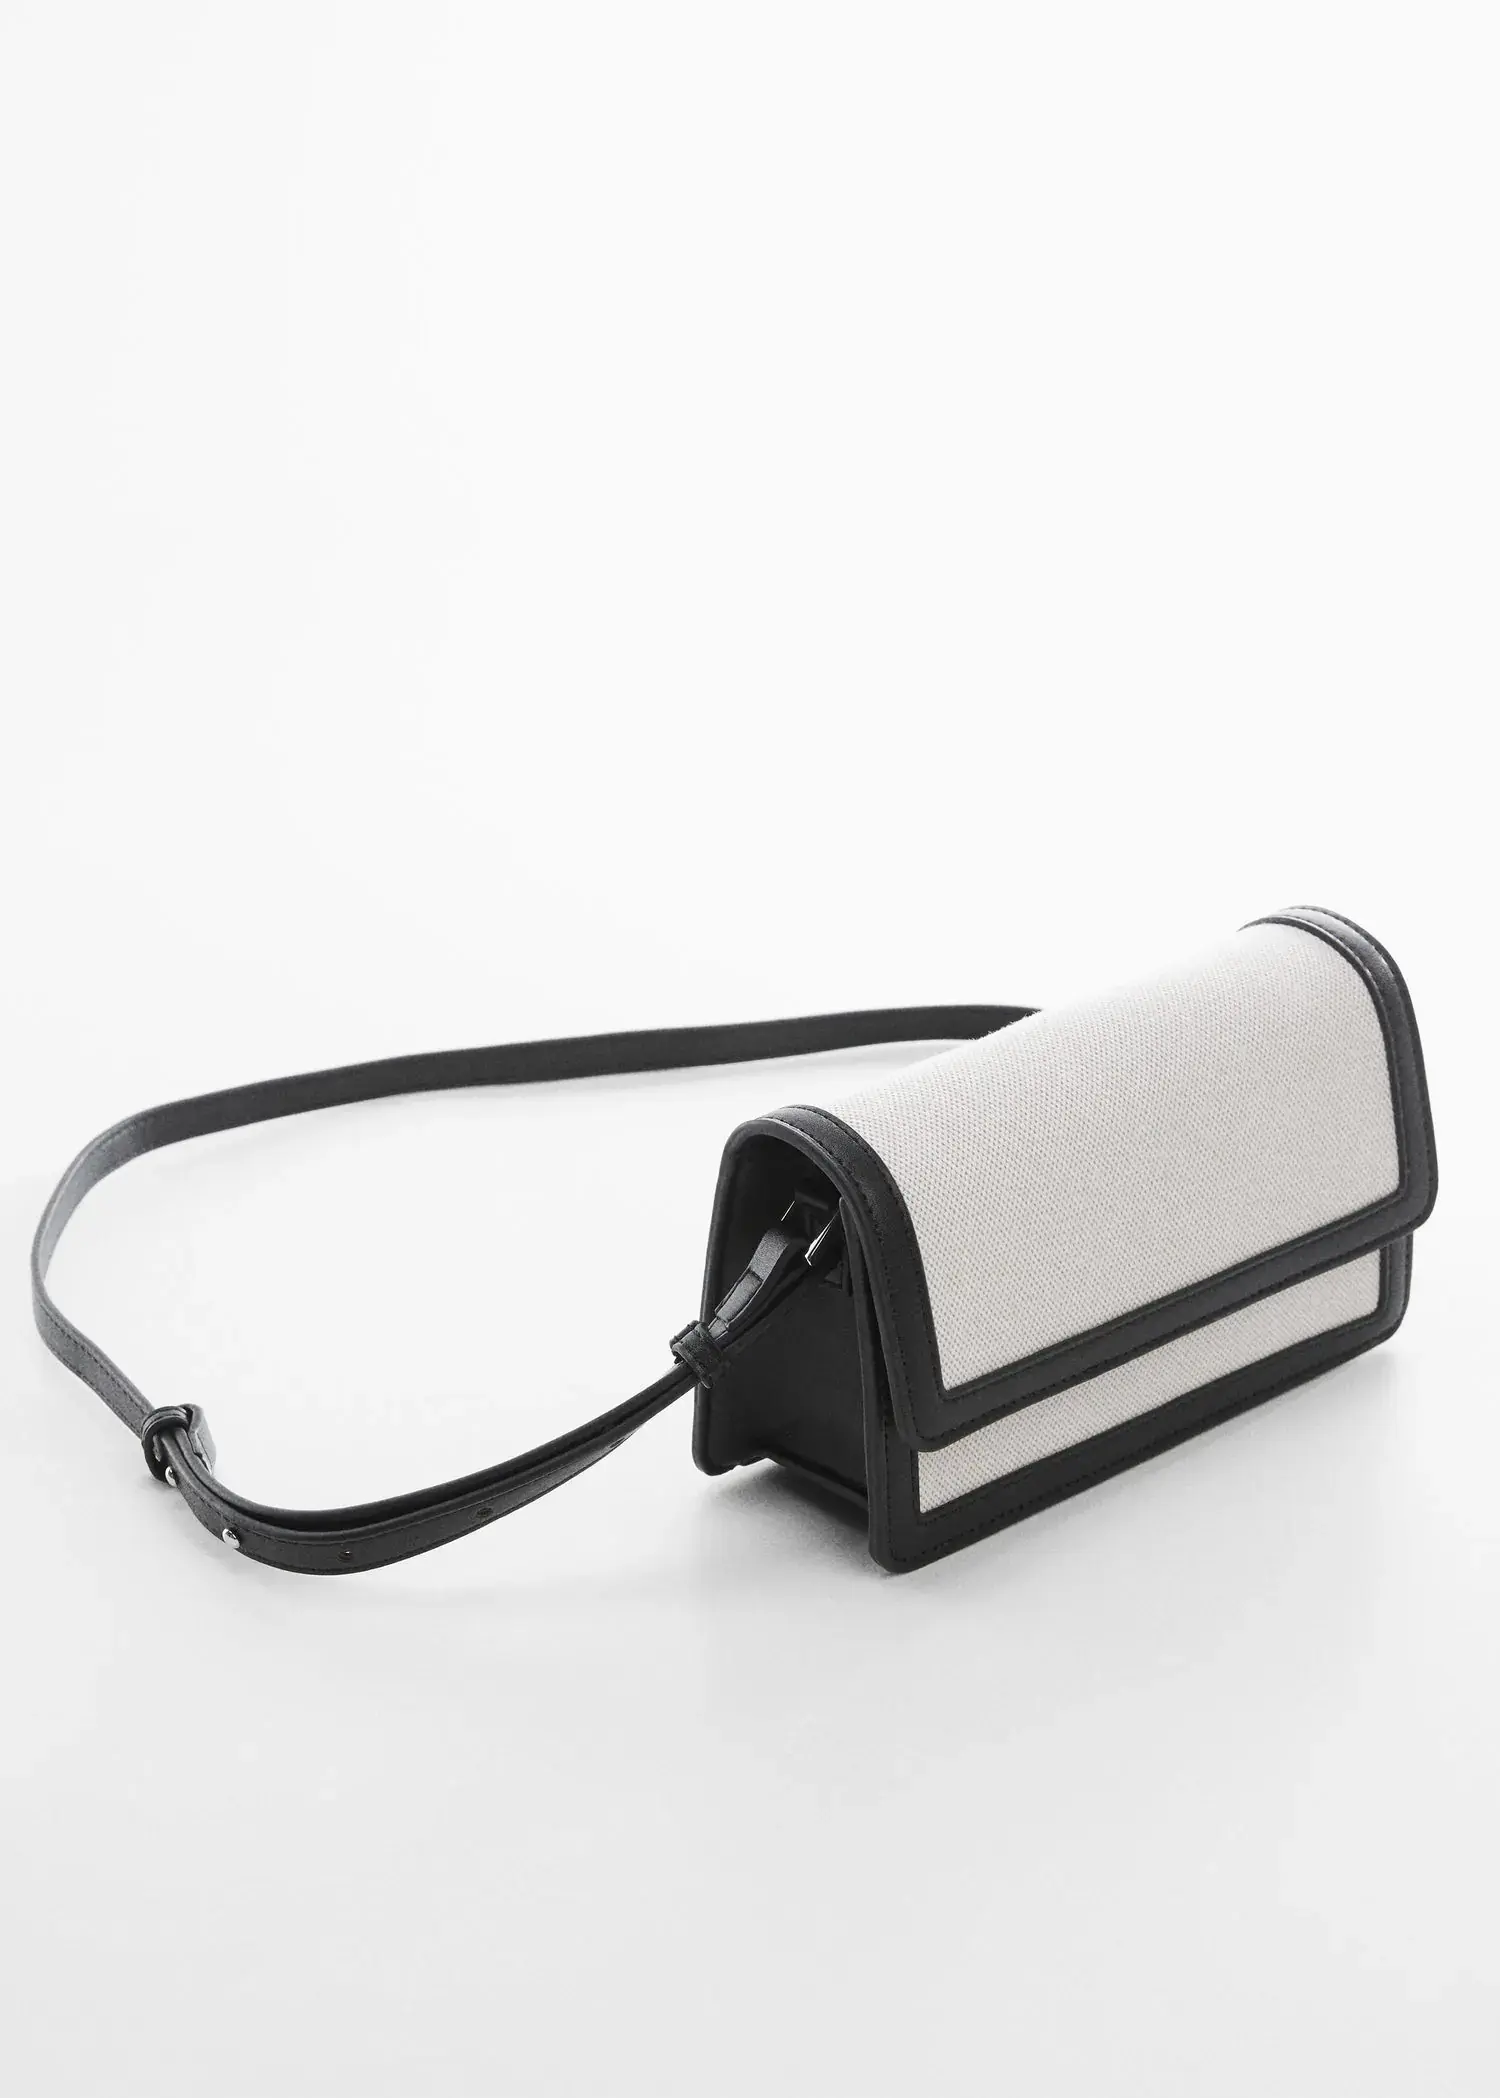 Mango Textured bag with flap. a black and white purse sitting on top of a table. 